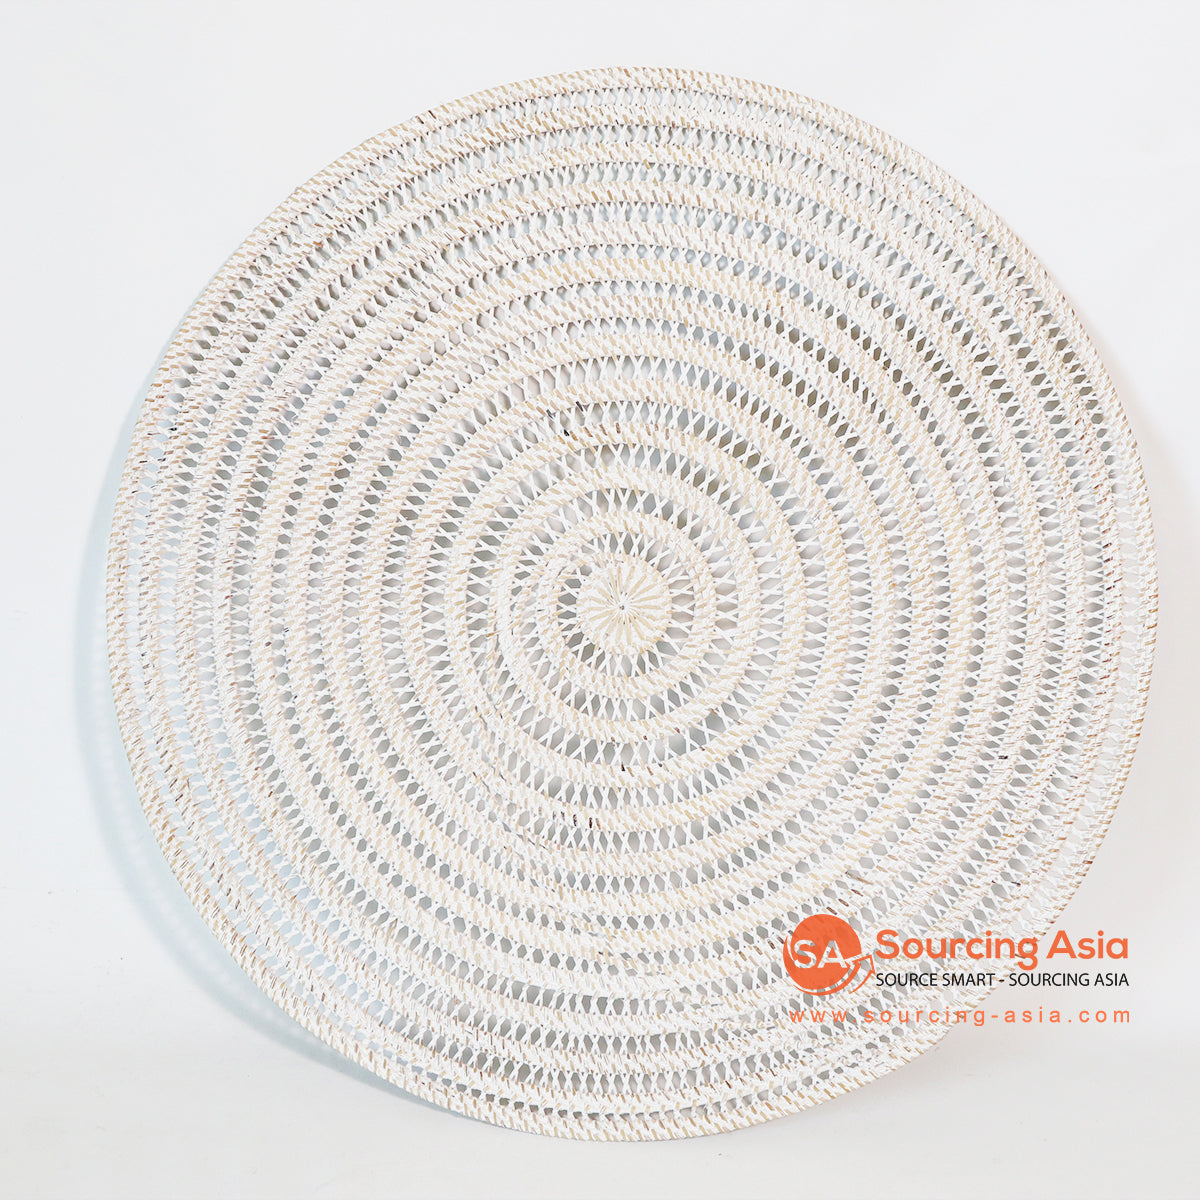 MTIC054 WHITE WASH WOVEN RATTAN PLACEMAT